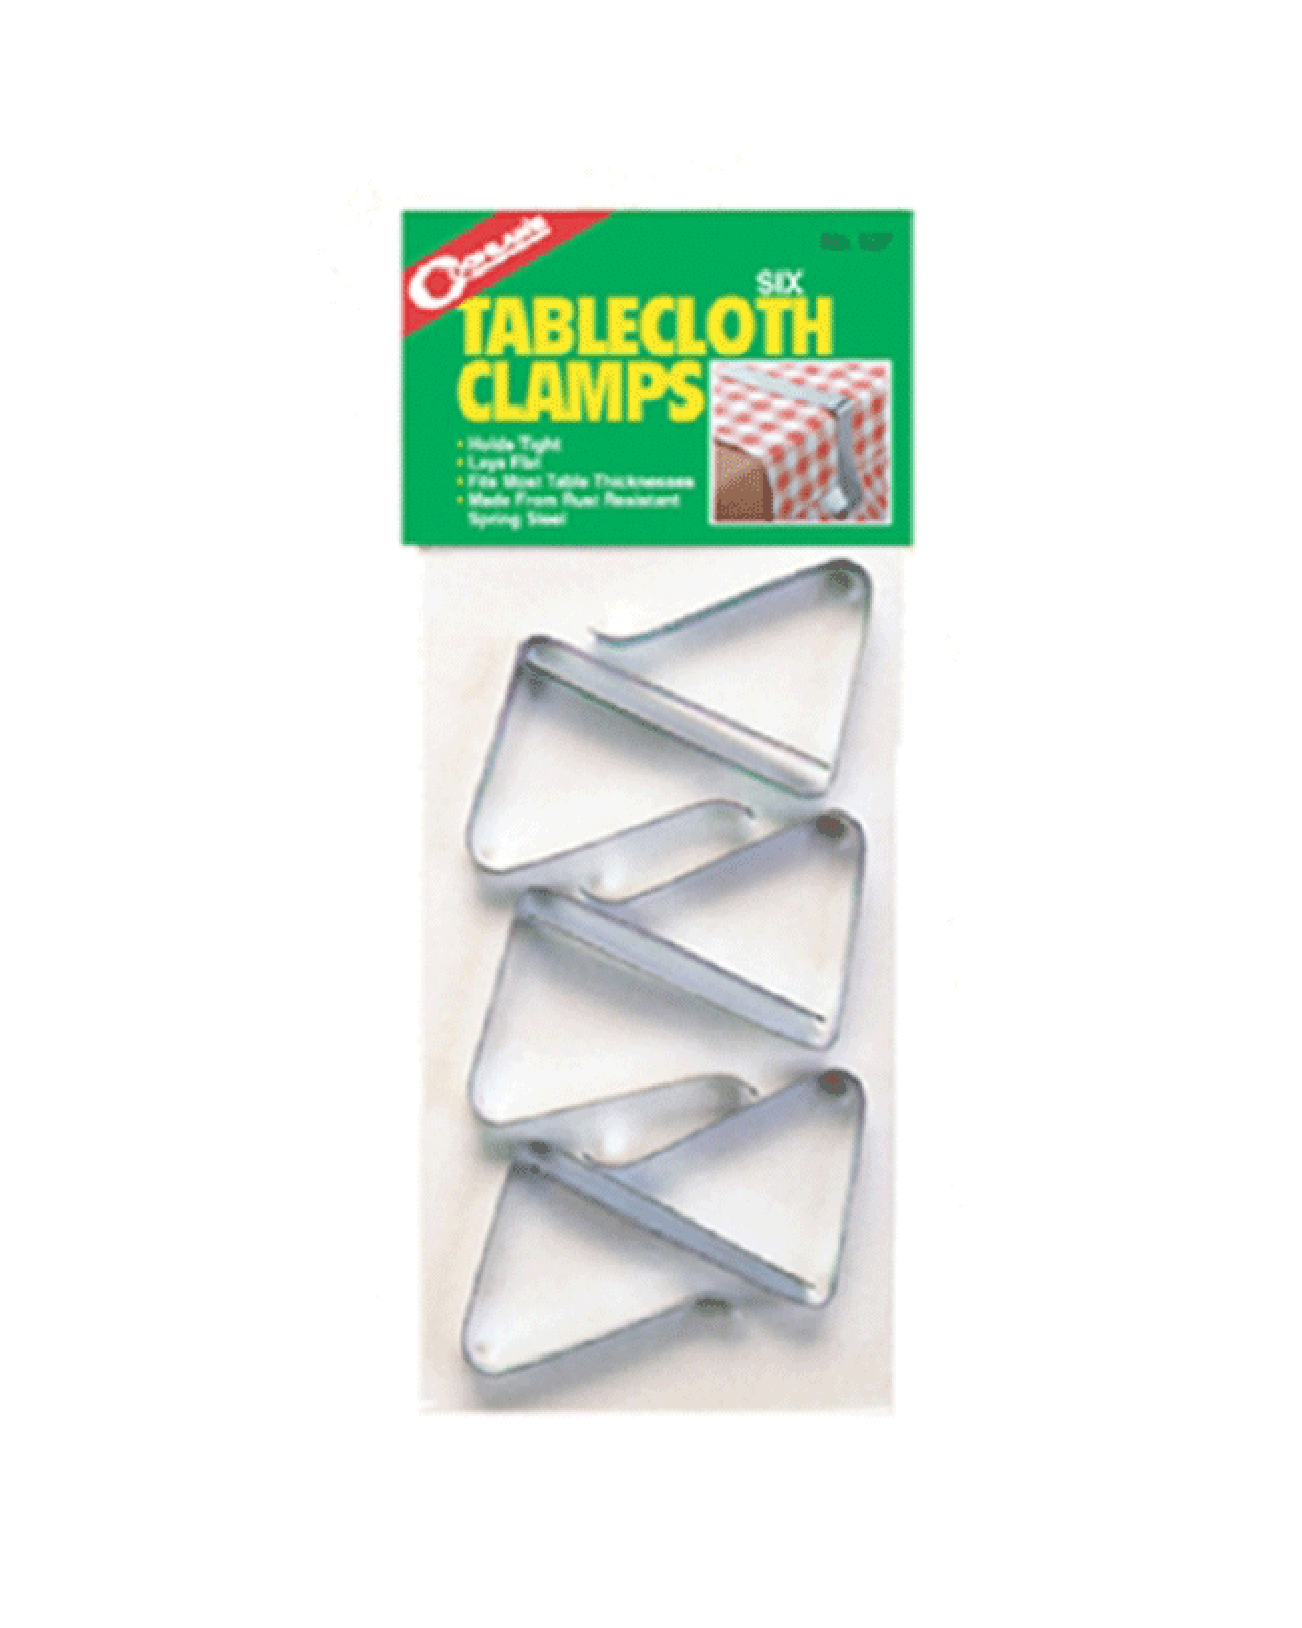 TABLE CLOTH CLAMPS